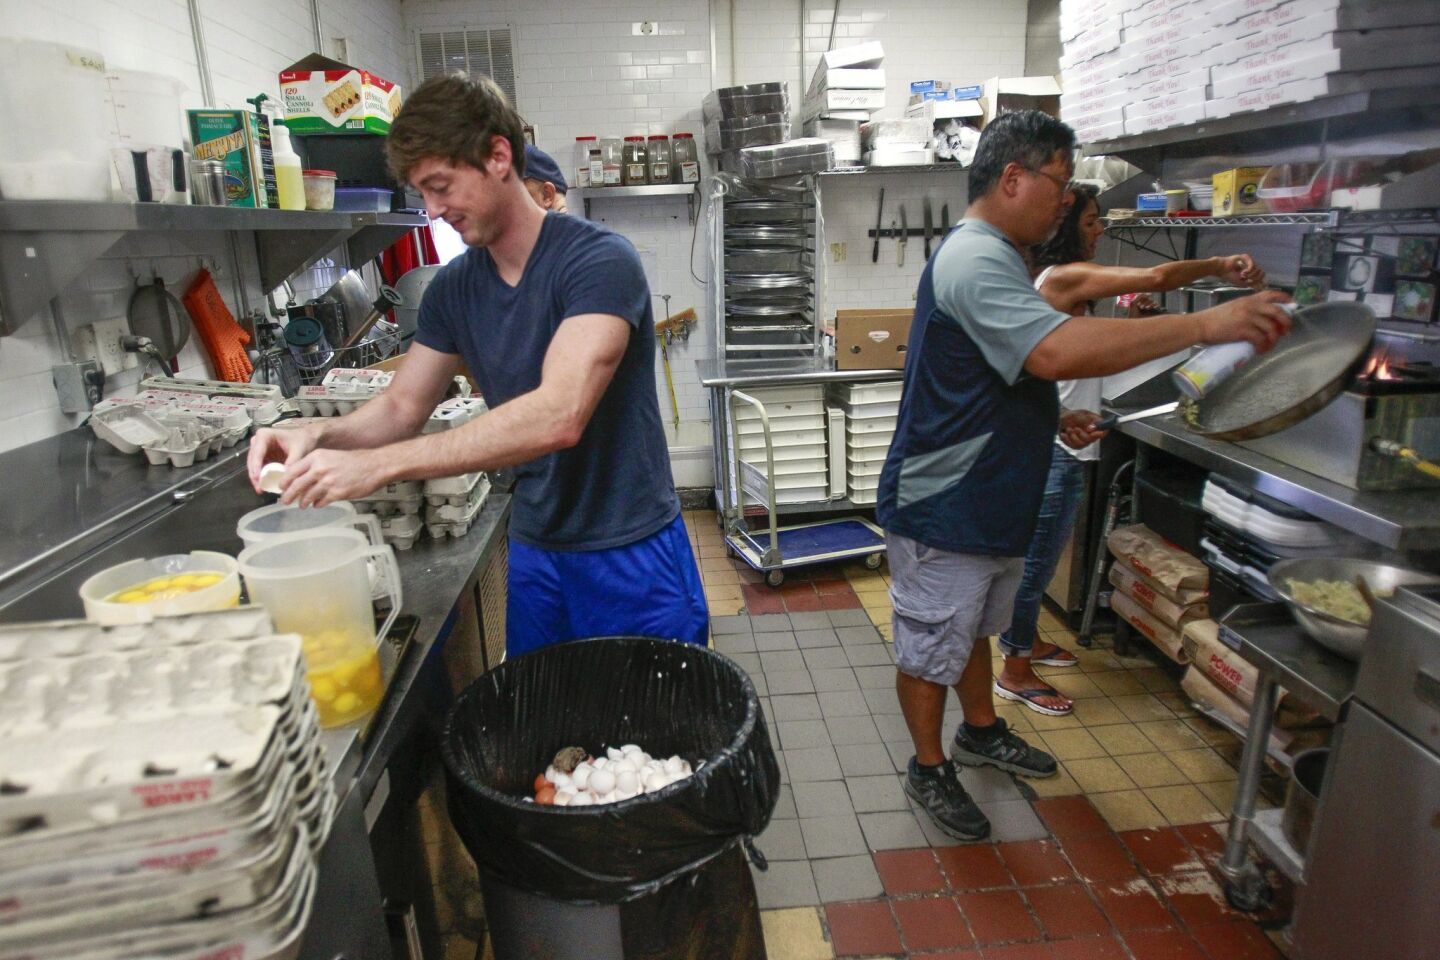 Burrito Boyz volunteer Conor McElroy, left, cracks eggs for scrambling as Jeff Chinn, right, and Mehrnaz Johnson cook scrambled eggs to make egg burritos for homeless people.